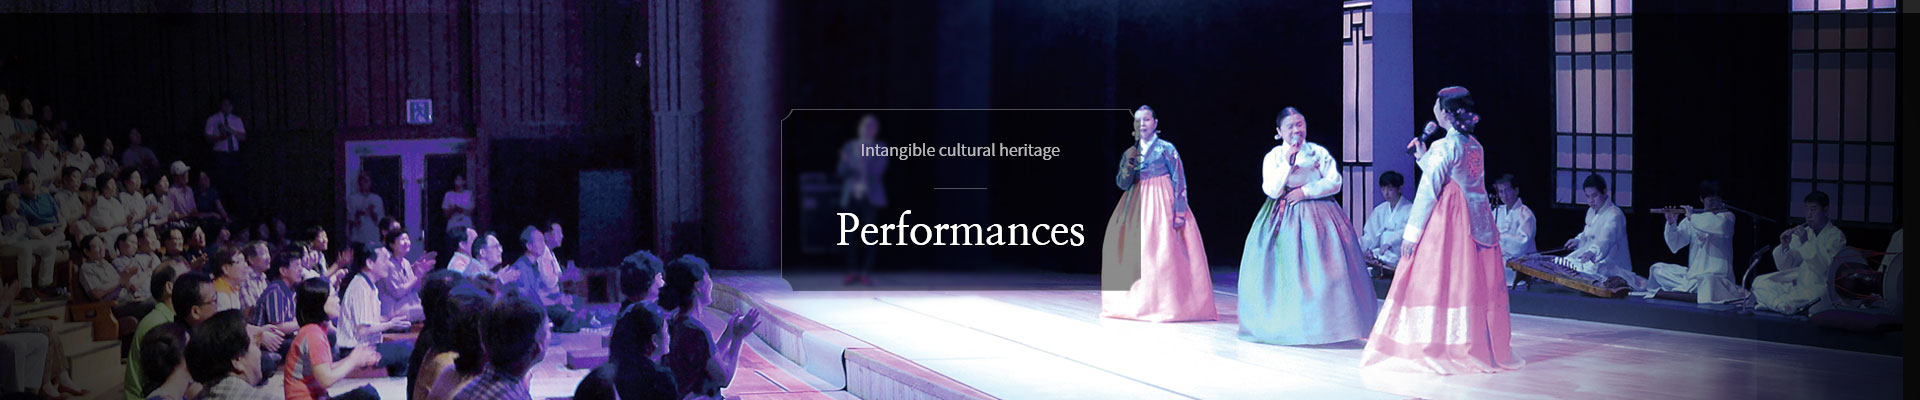 Intangible cultural heritage, Performances